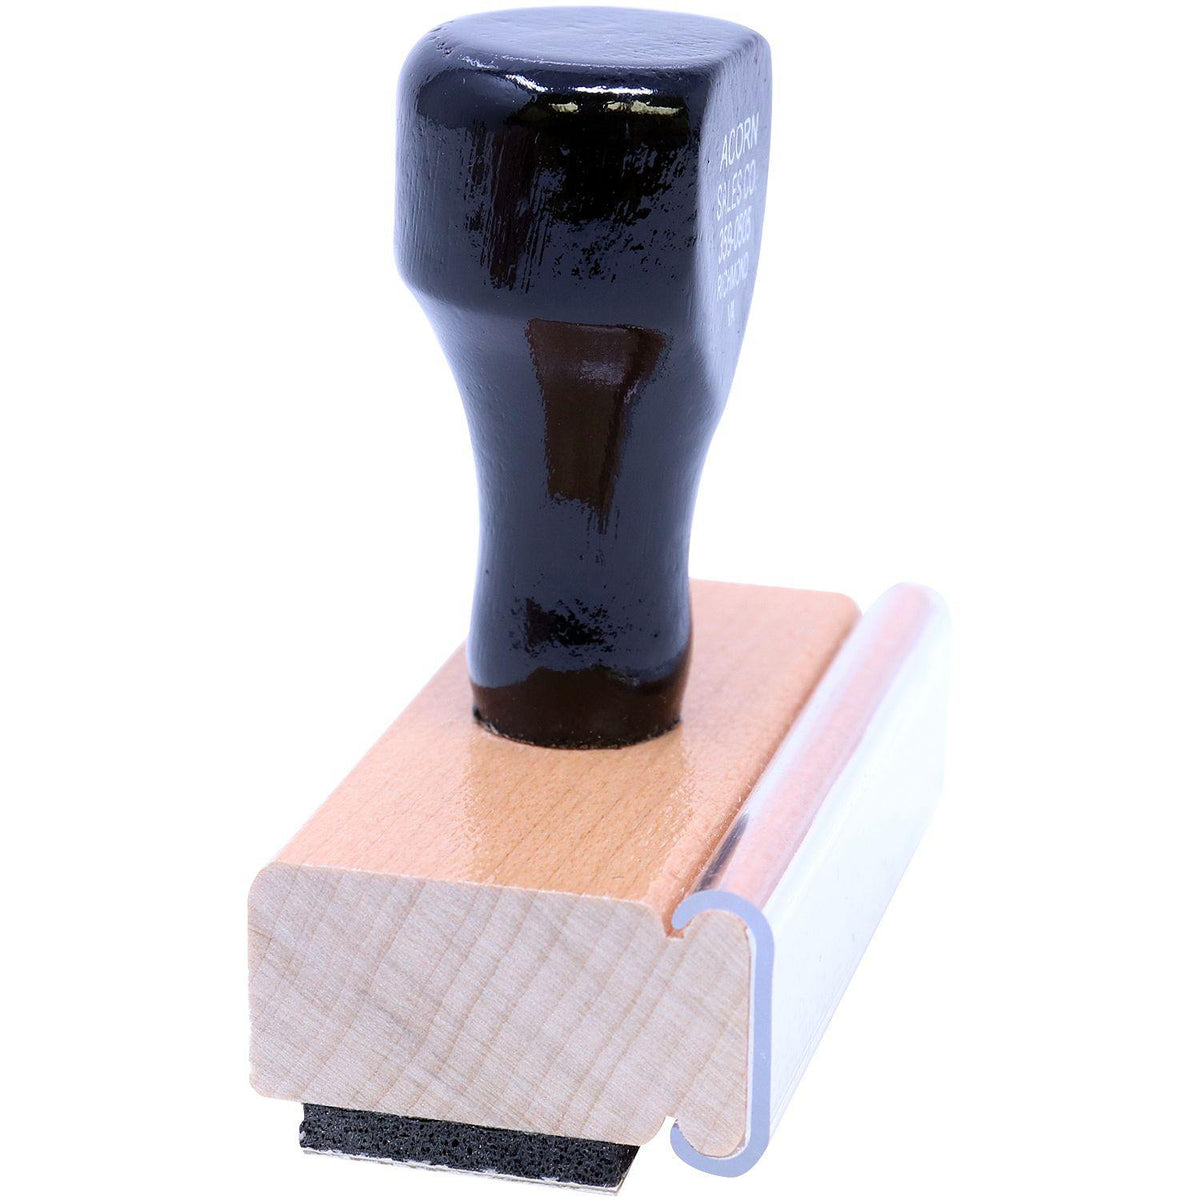 Side View of Large Immunocompromised Rubber Stamp at an Angle